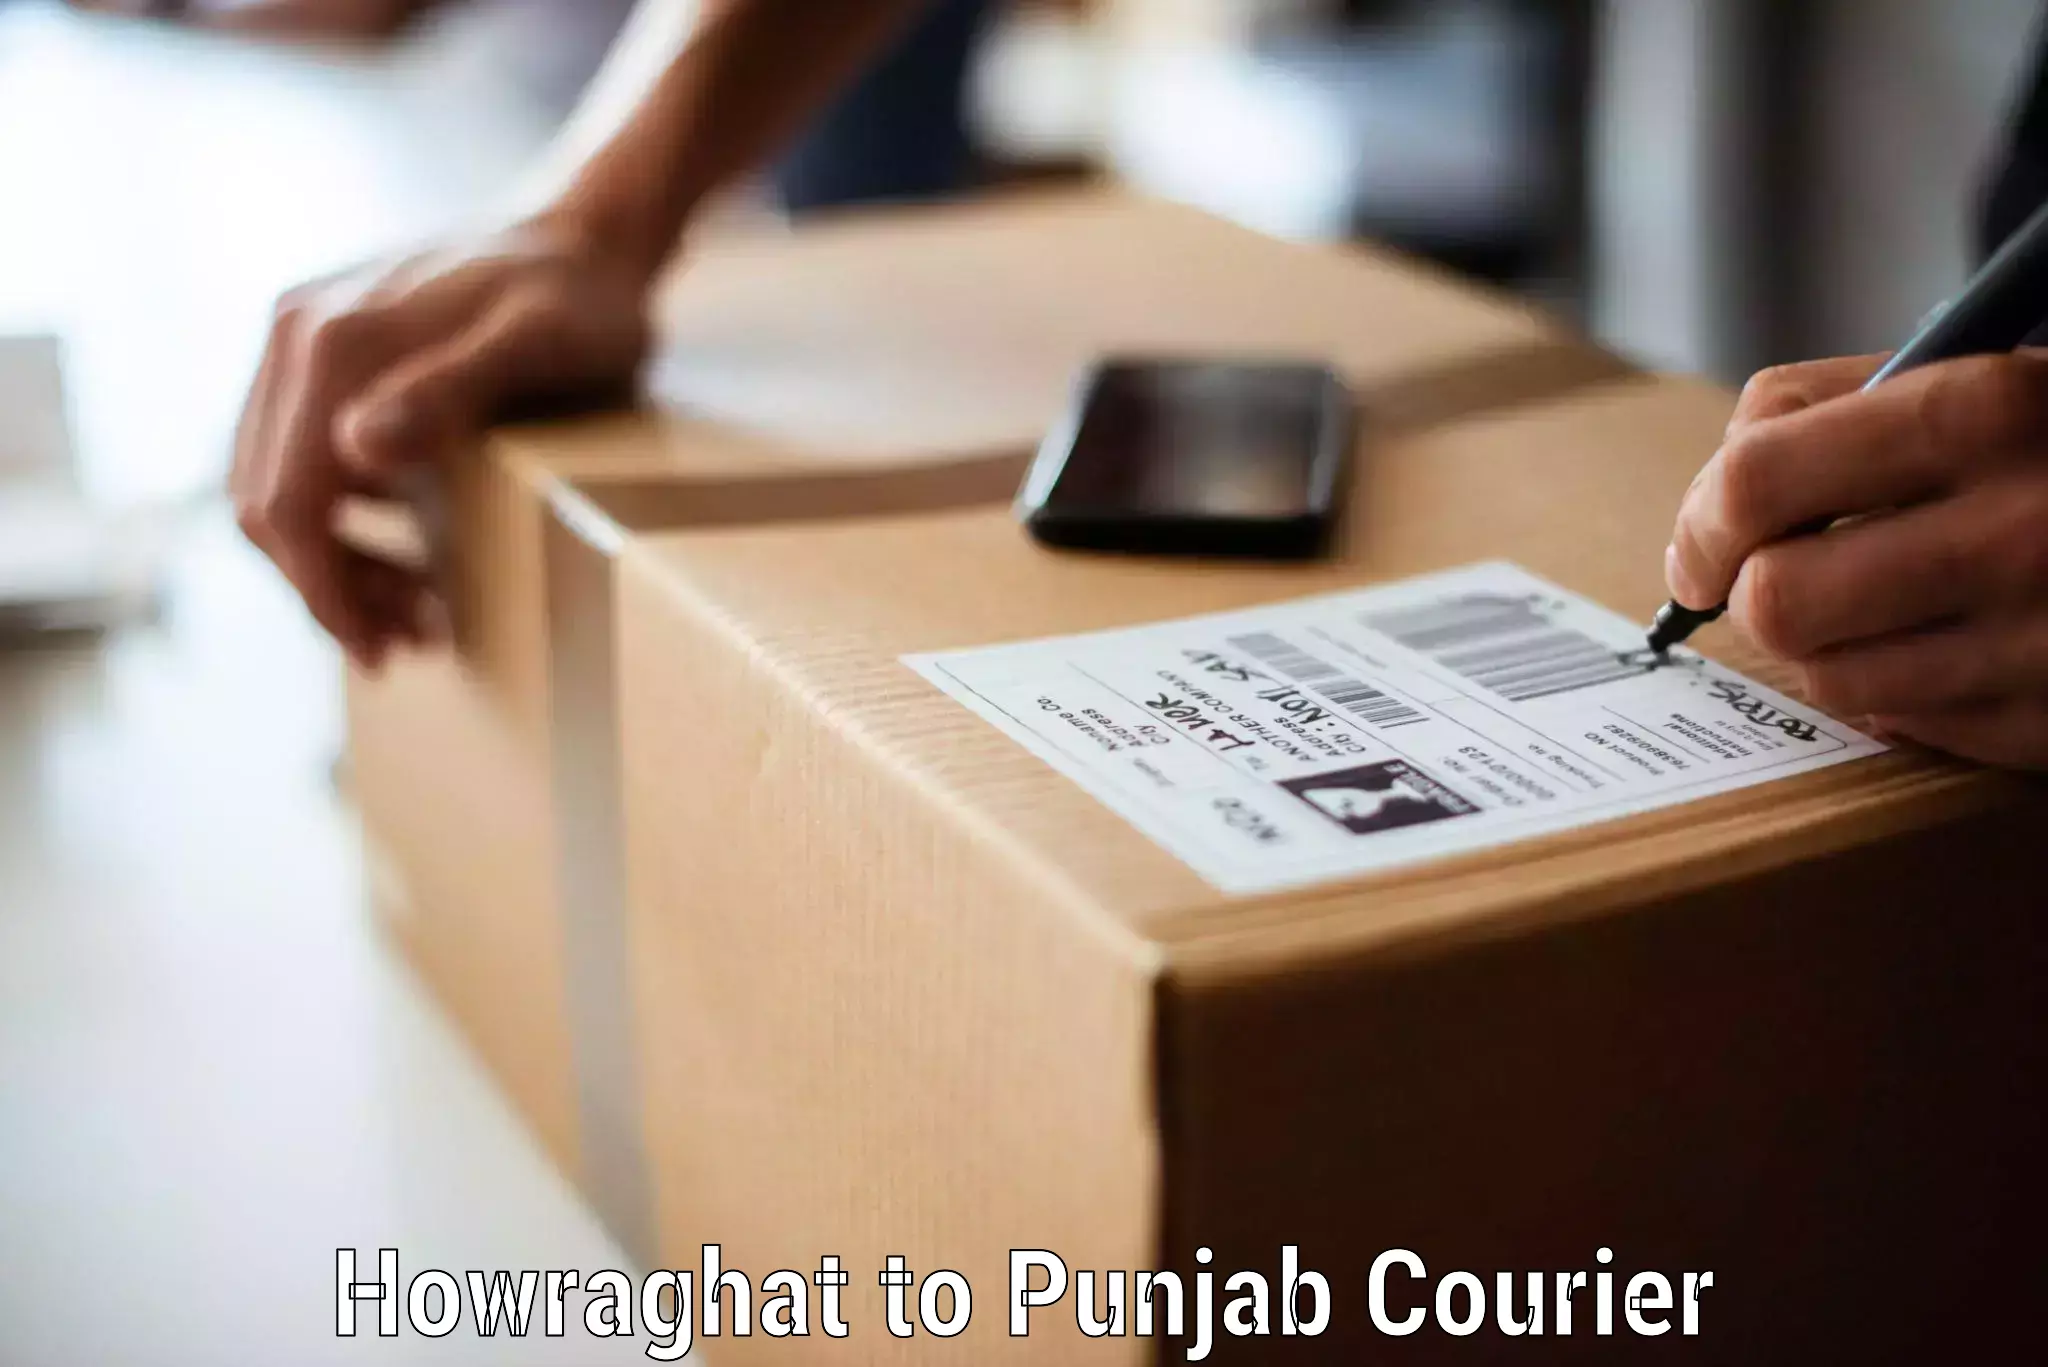 Reliable movers Howraghat to Faridkot